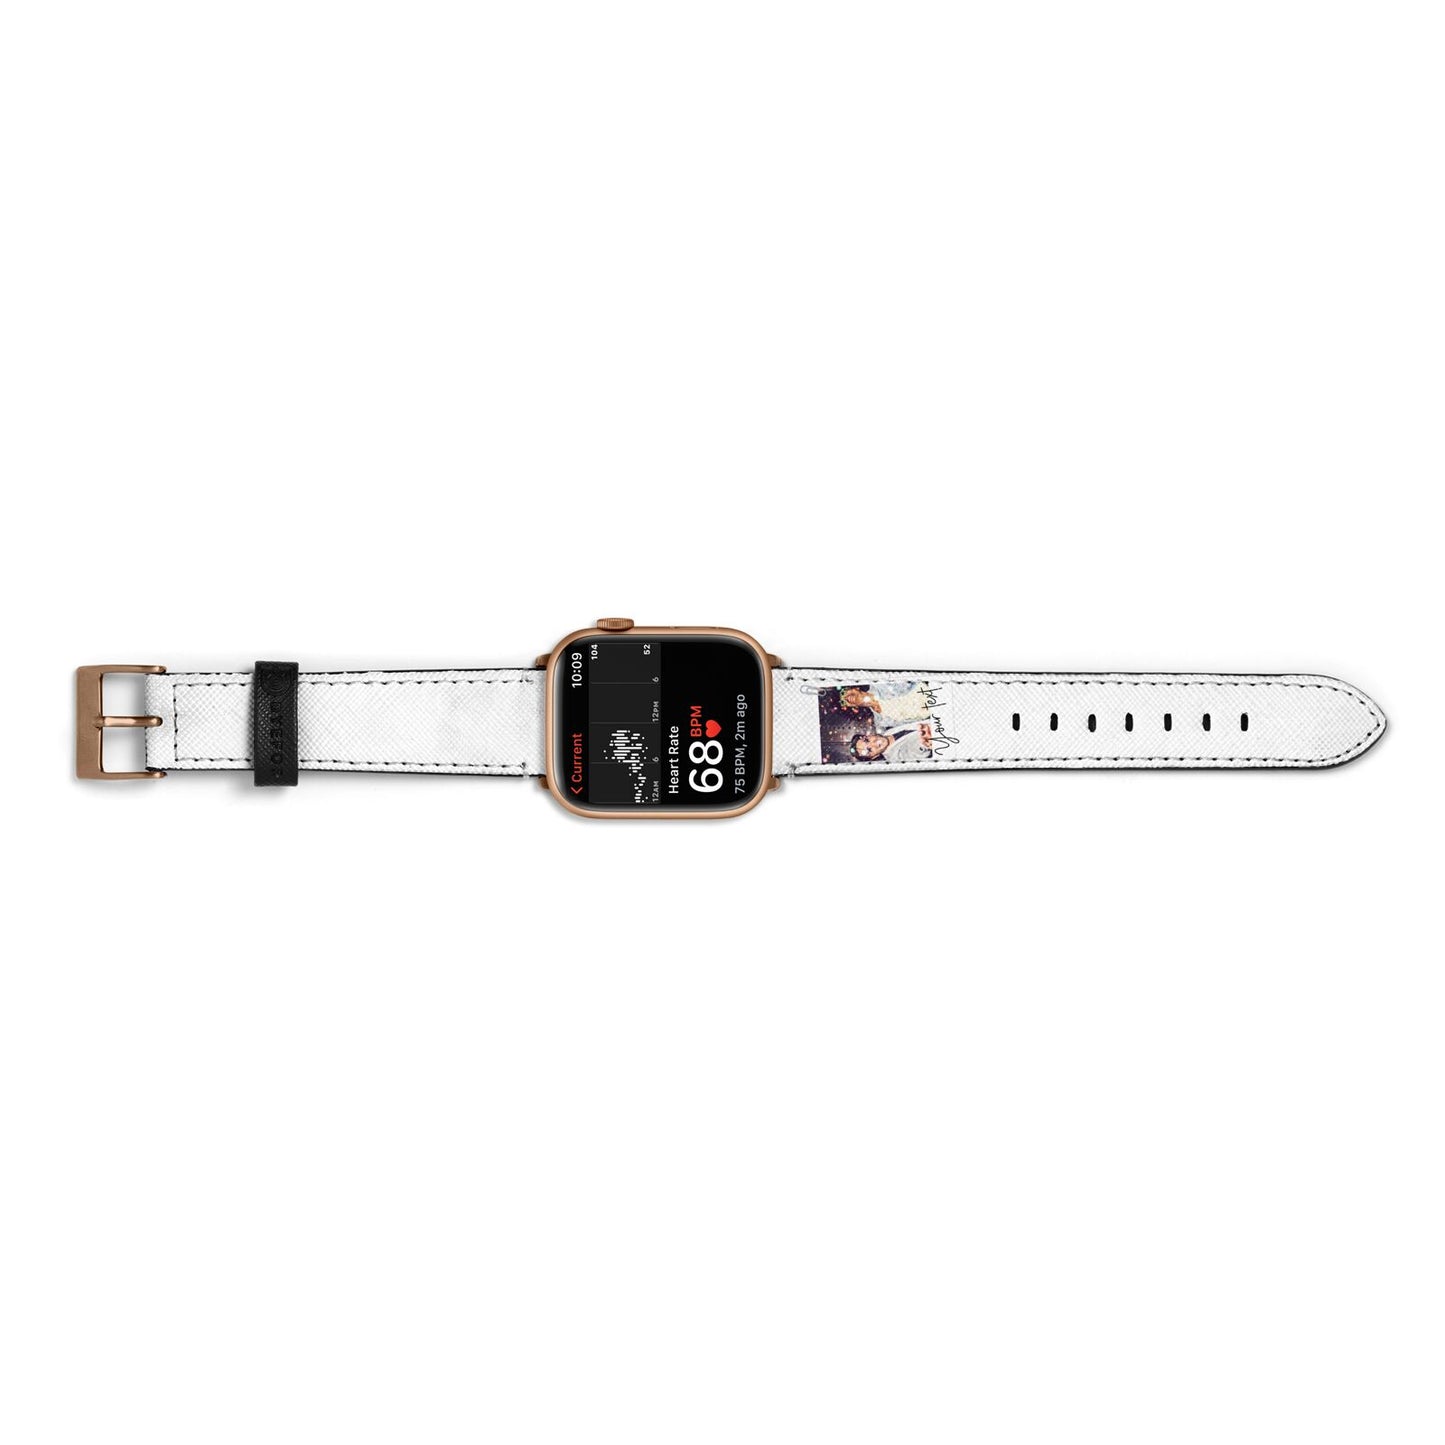 Personalised Photo with Text Apple Watch Strap Size 38mm Landscape Image Gold Hardware